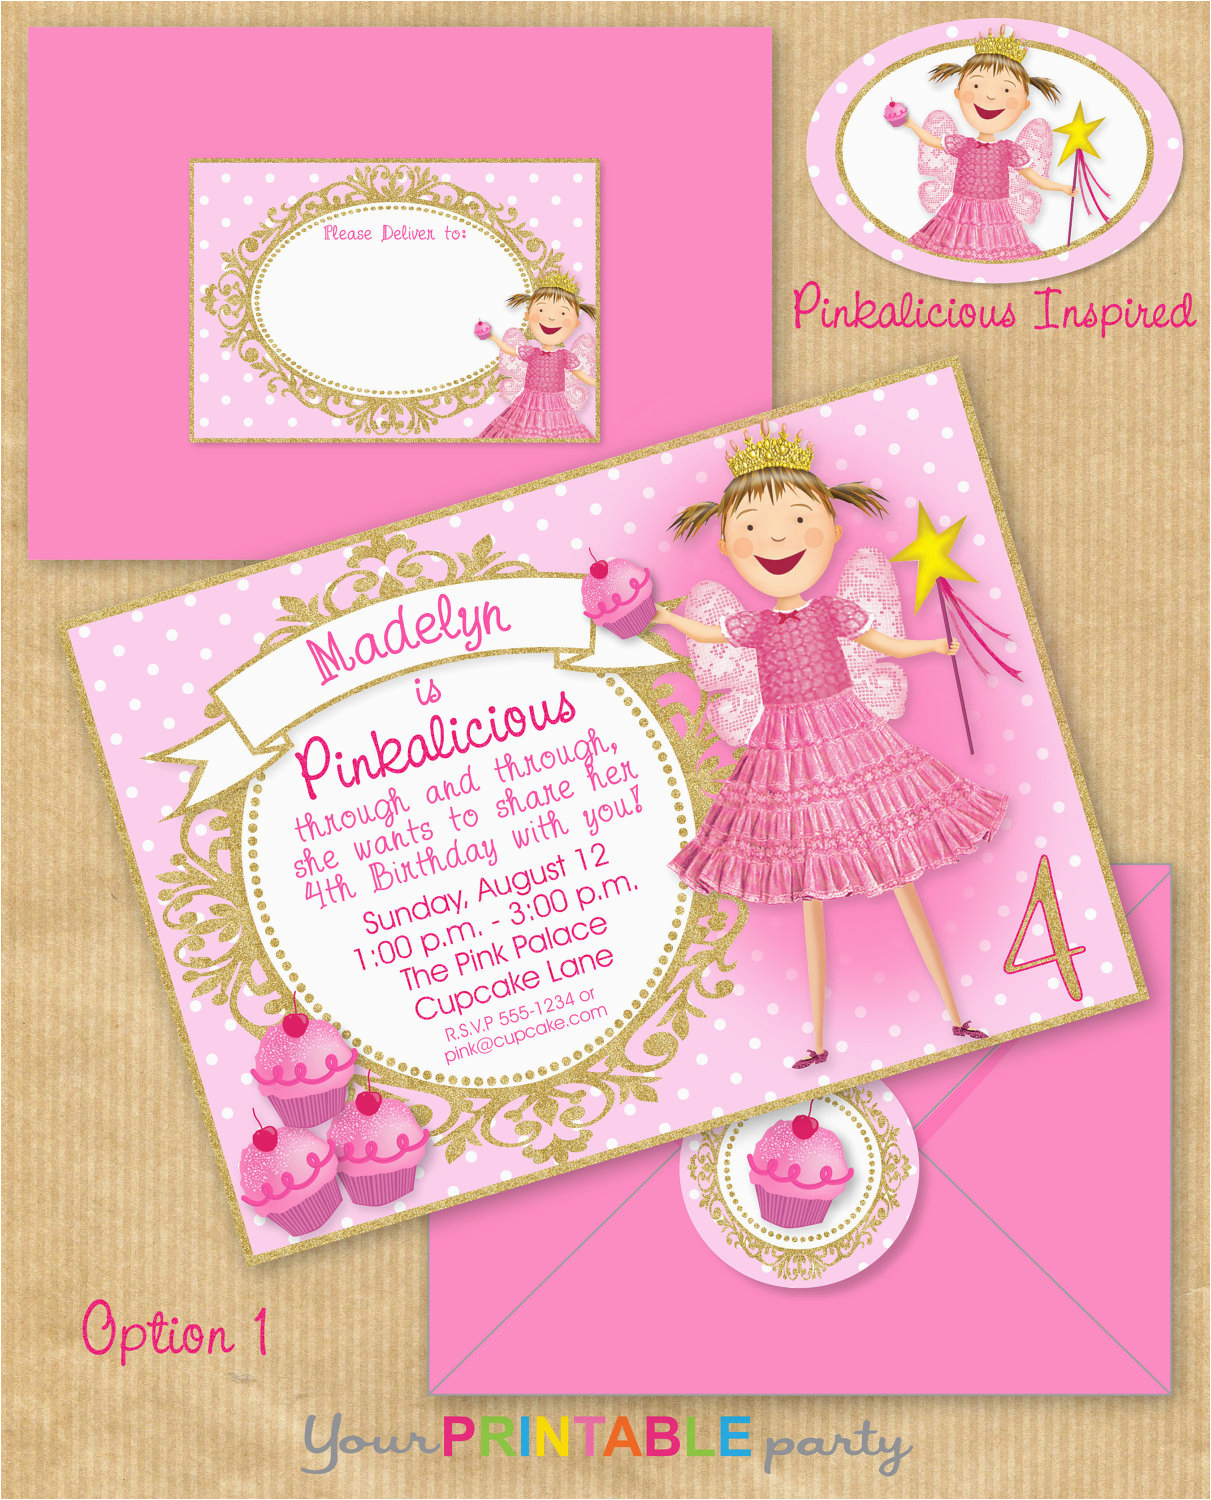 Pinkalicious Birthday Invitations Pinkalicious Party Invitation 5×7 with by Yourprintableparty